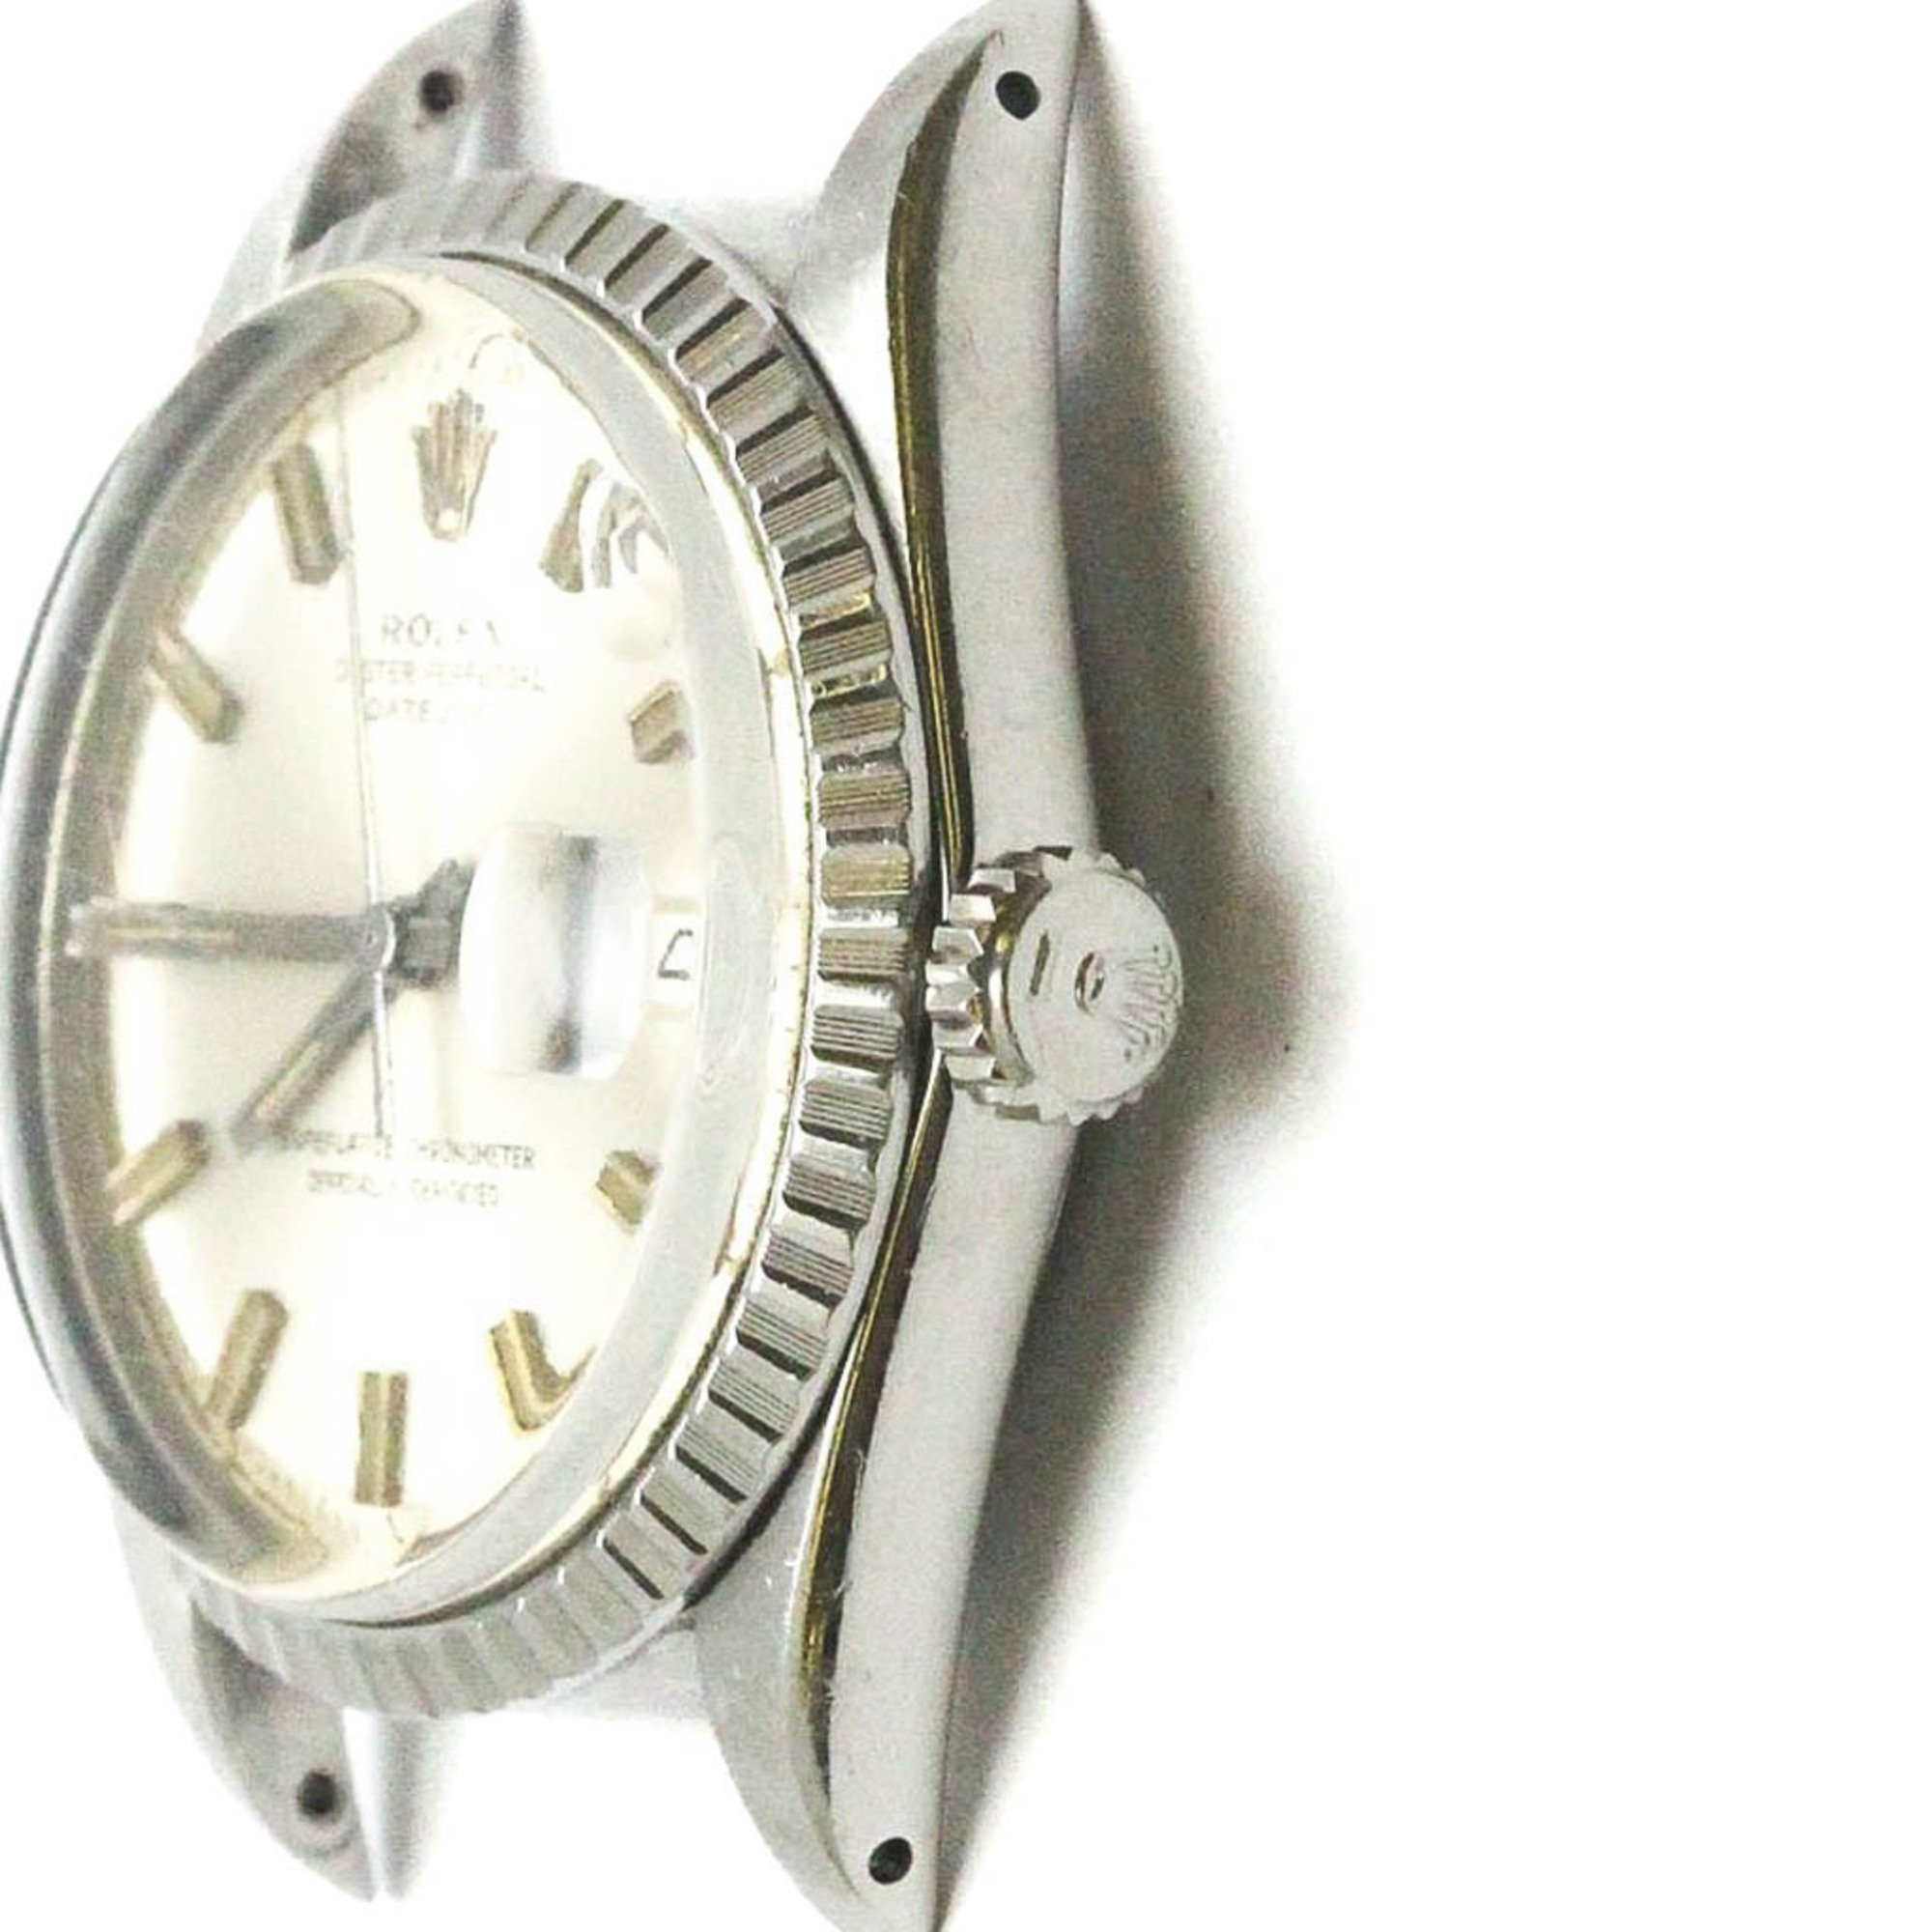 Vintage ROLEX Datejust 1601 Steel Automatic Mens Watch Head Only BF552135